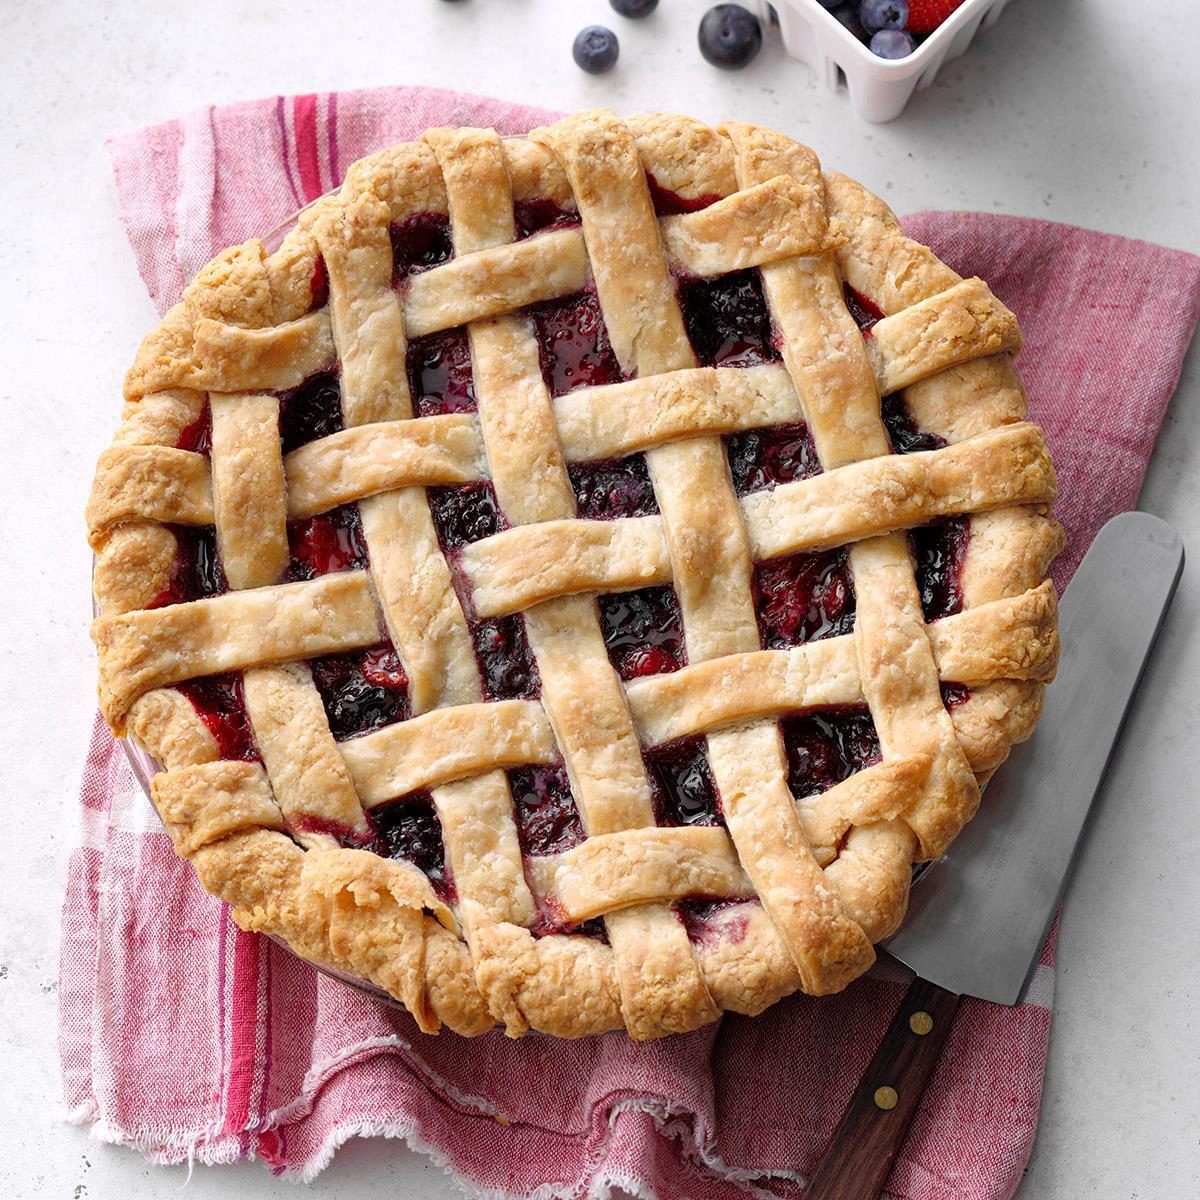 Mixed Berry Pie Recipe: How to Make It